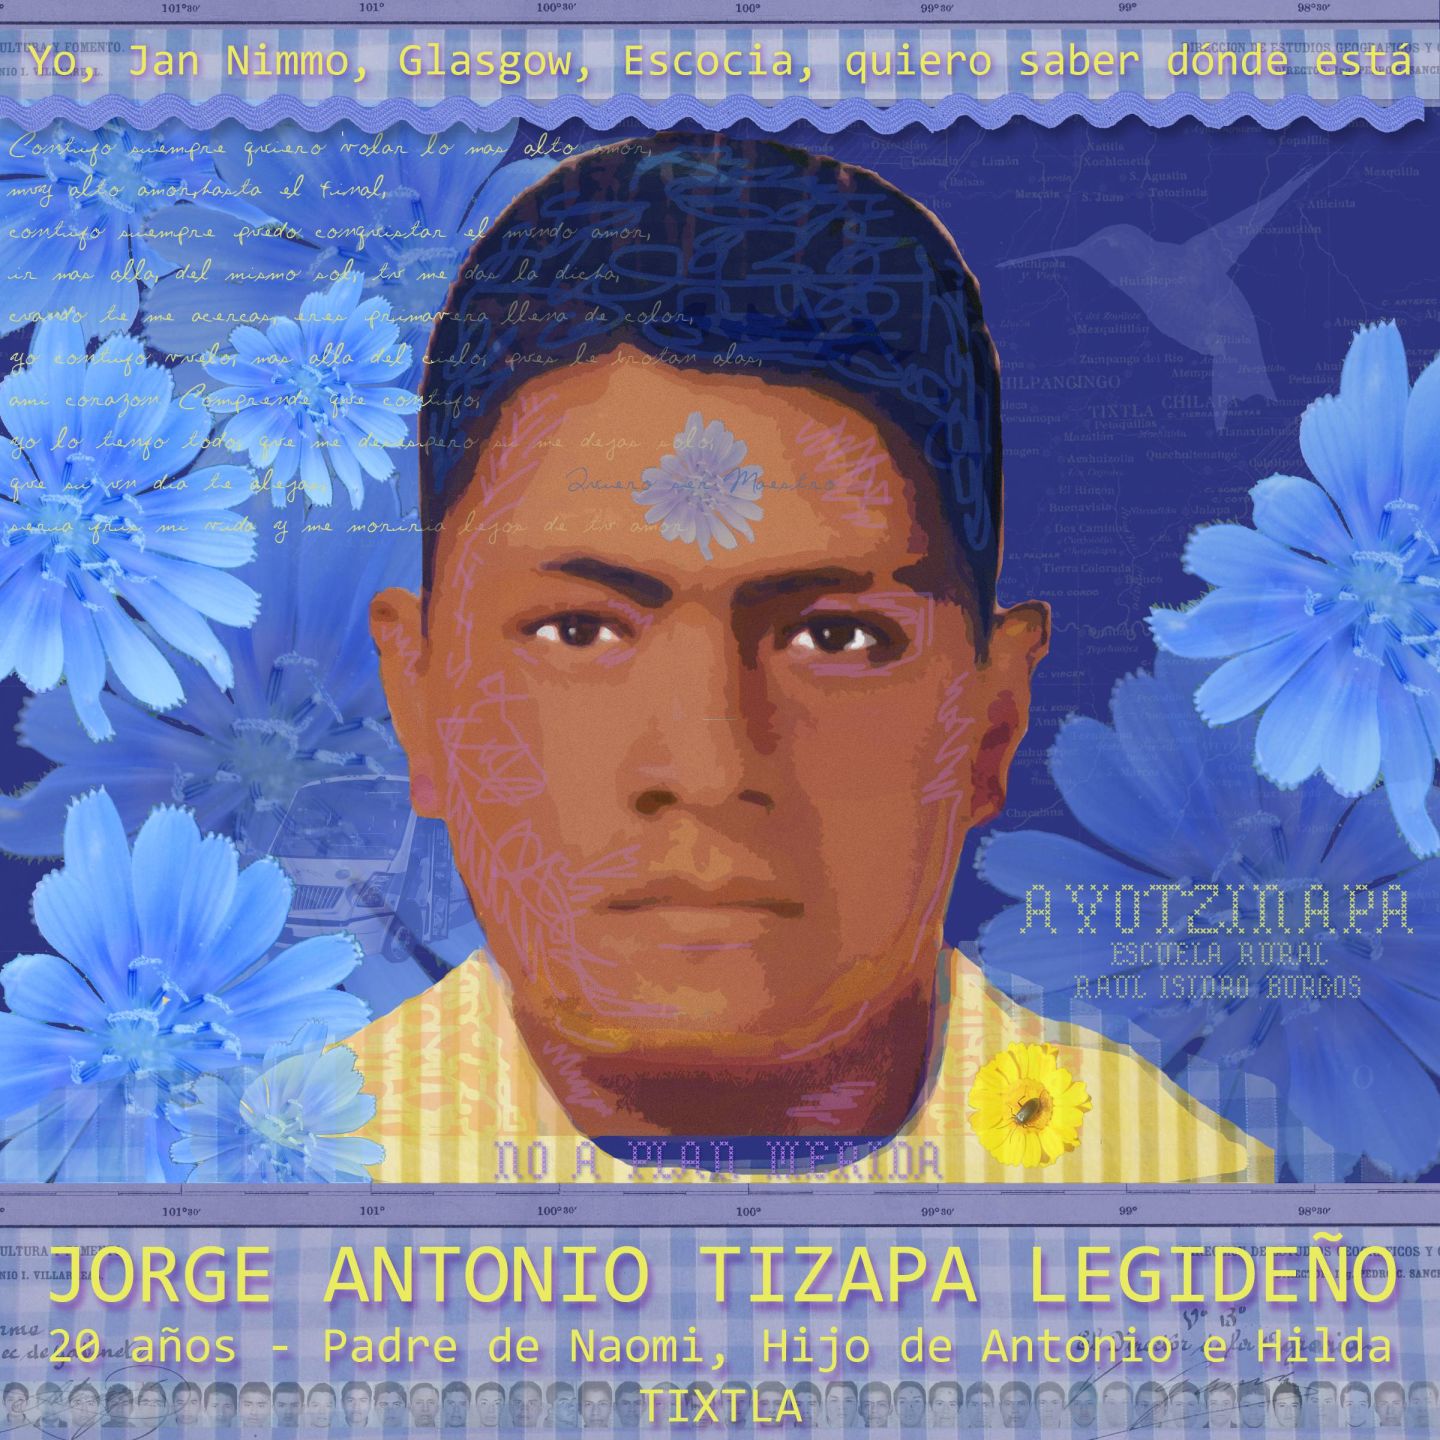 A tribute to Mexico's disappeared amidst demands for the truth 26